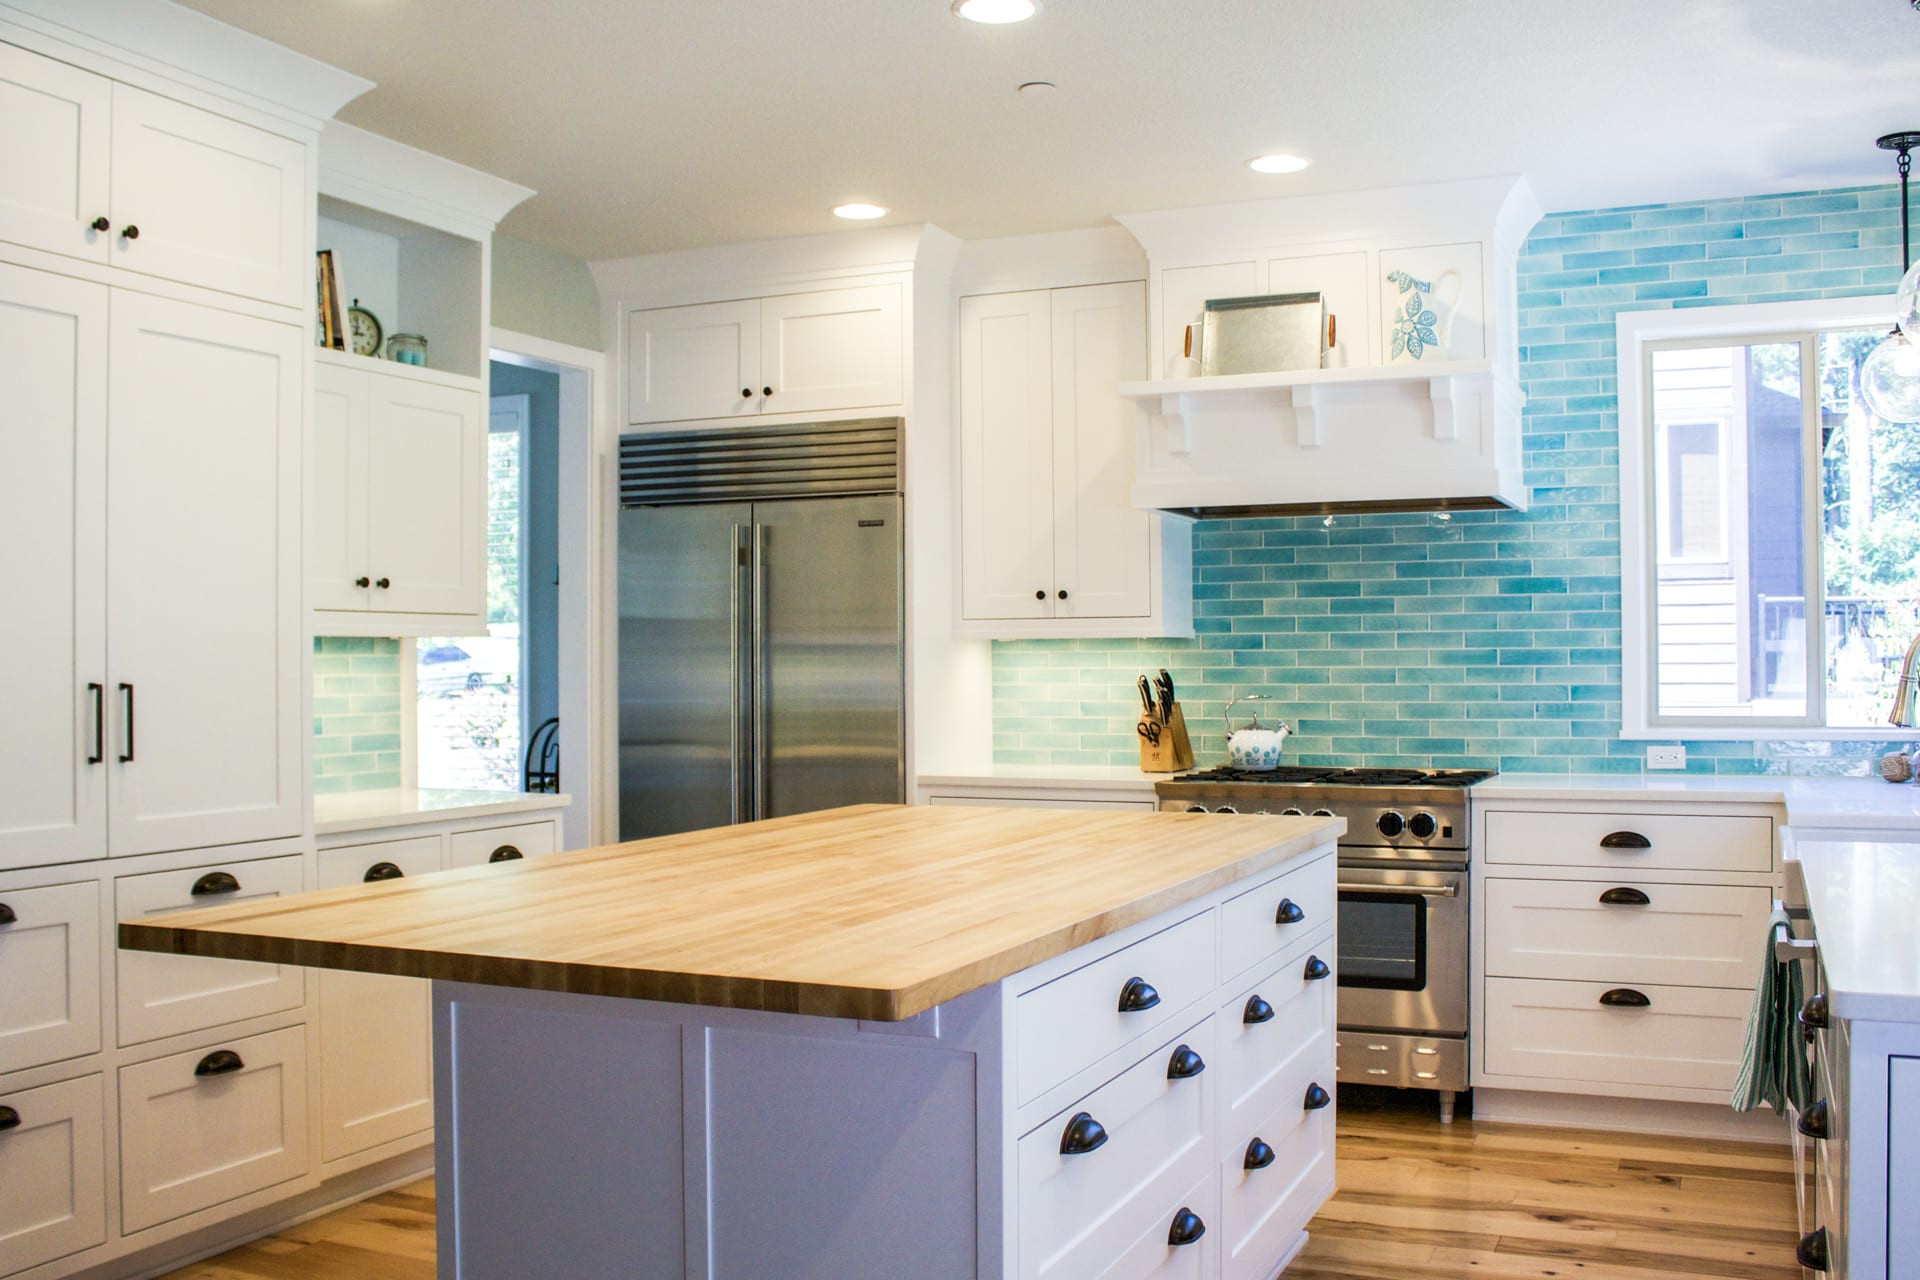 Blue And White Kitchen Tiles
 Custom designed kitchen with white cabinets and bold blue